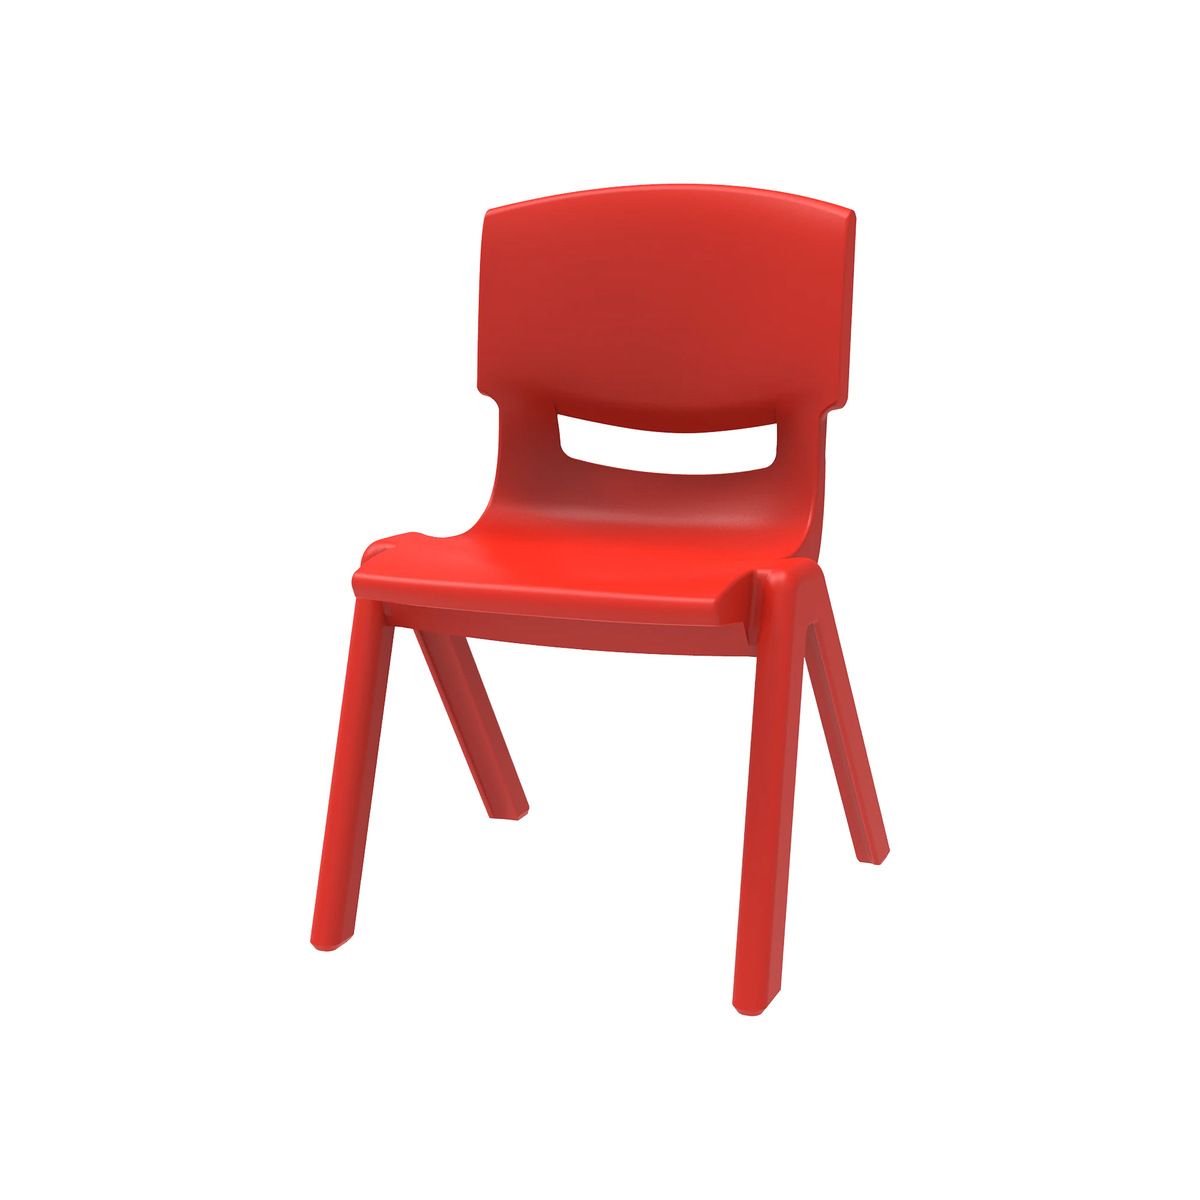 Cosmoplast Deluxe Junior Chair IFHHBY161, Red Color